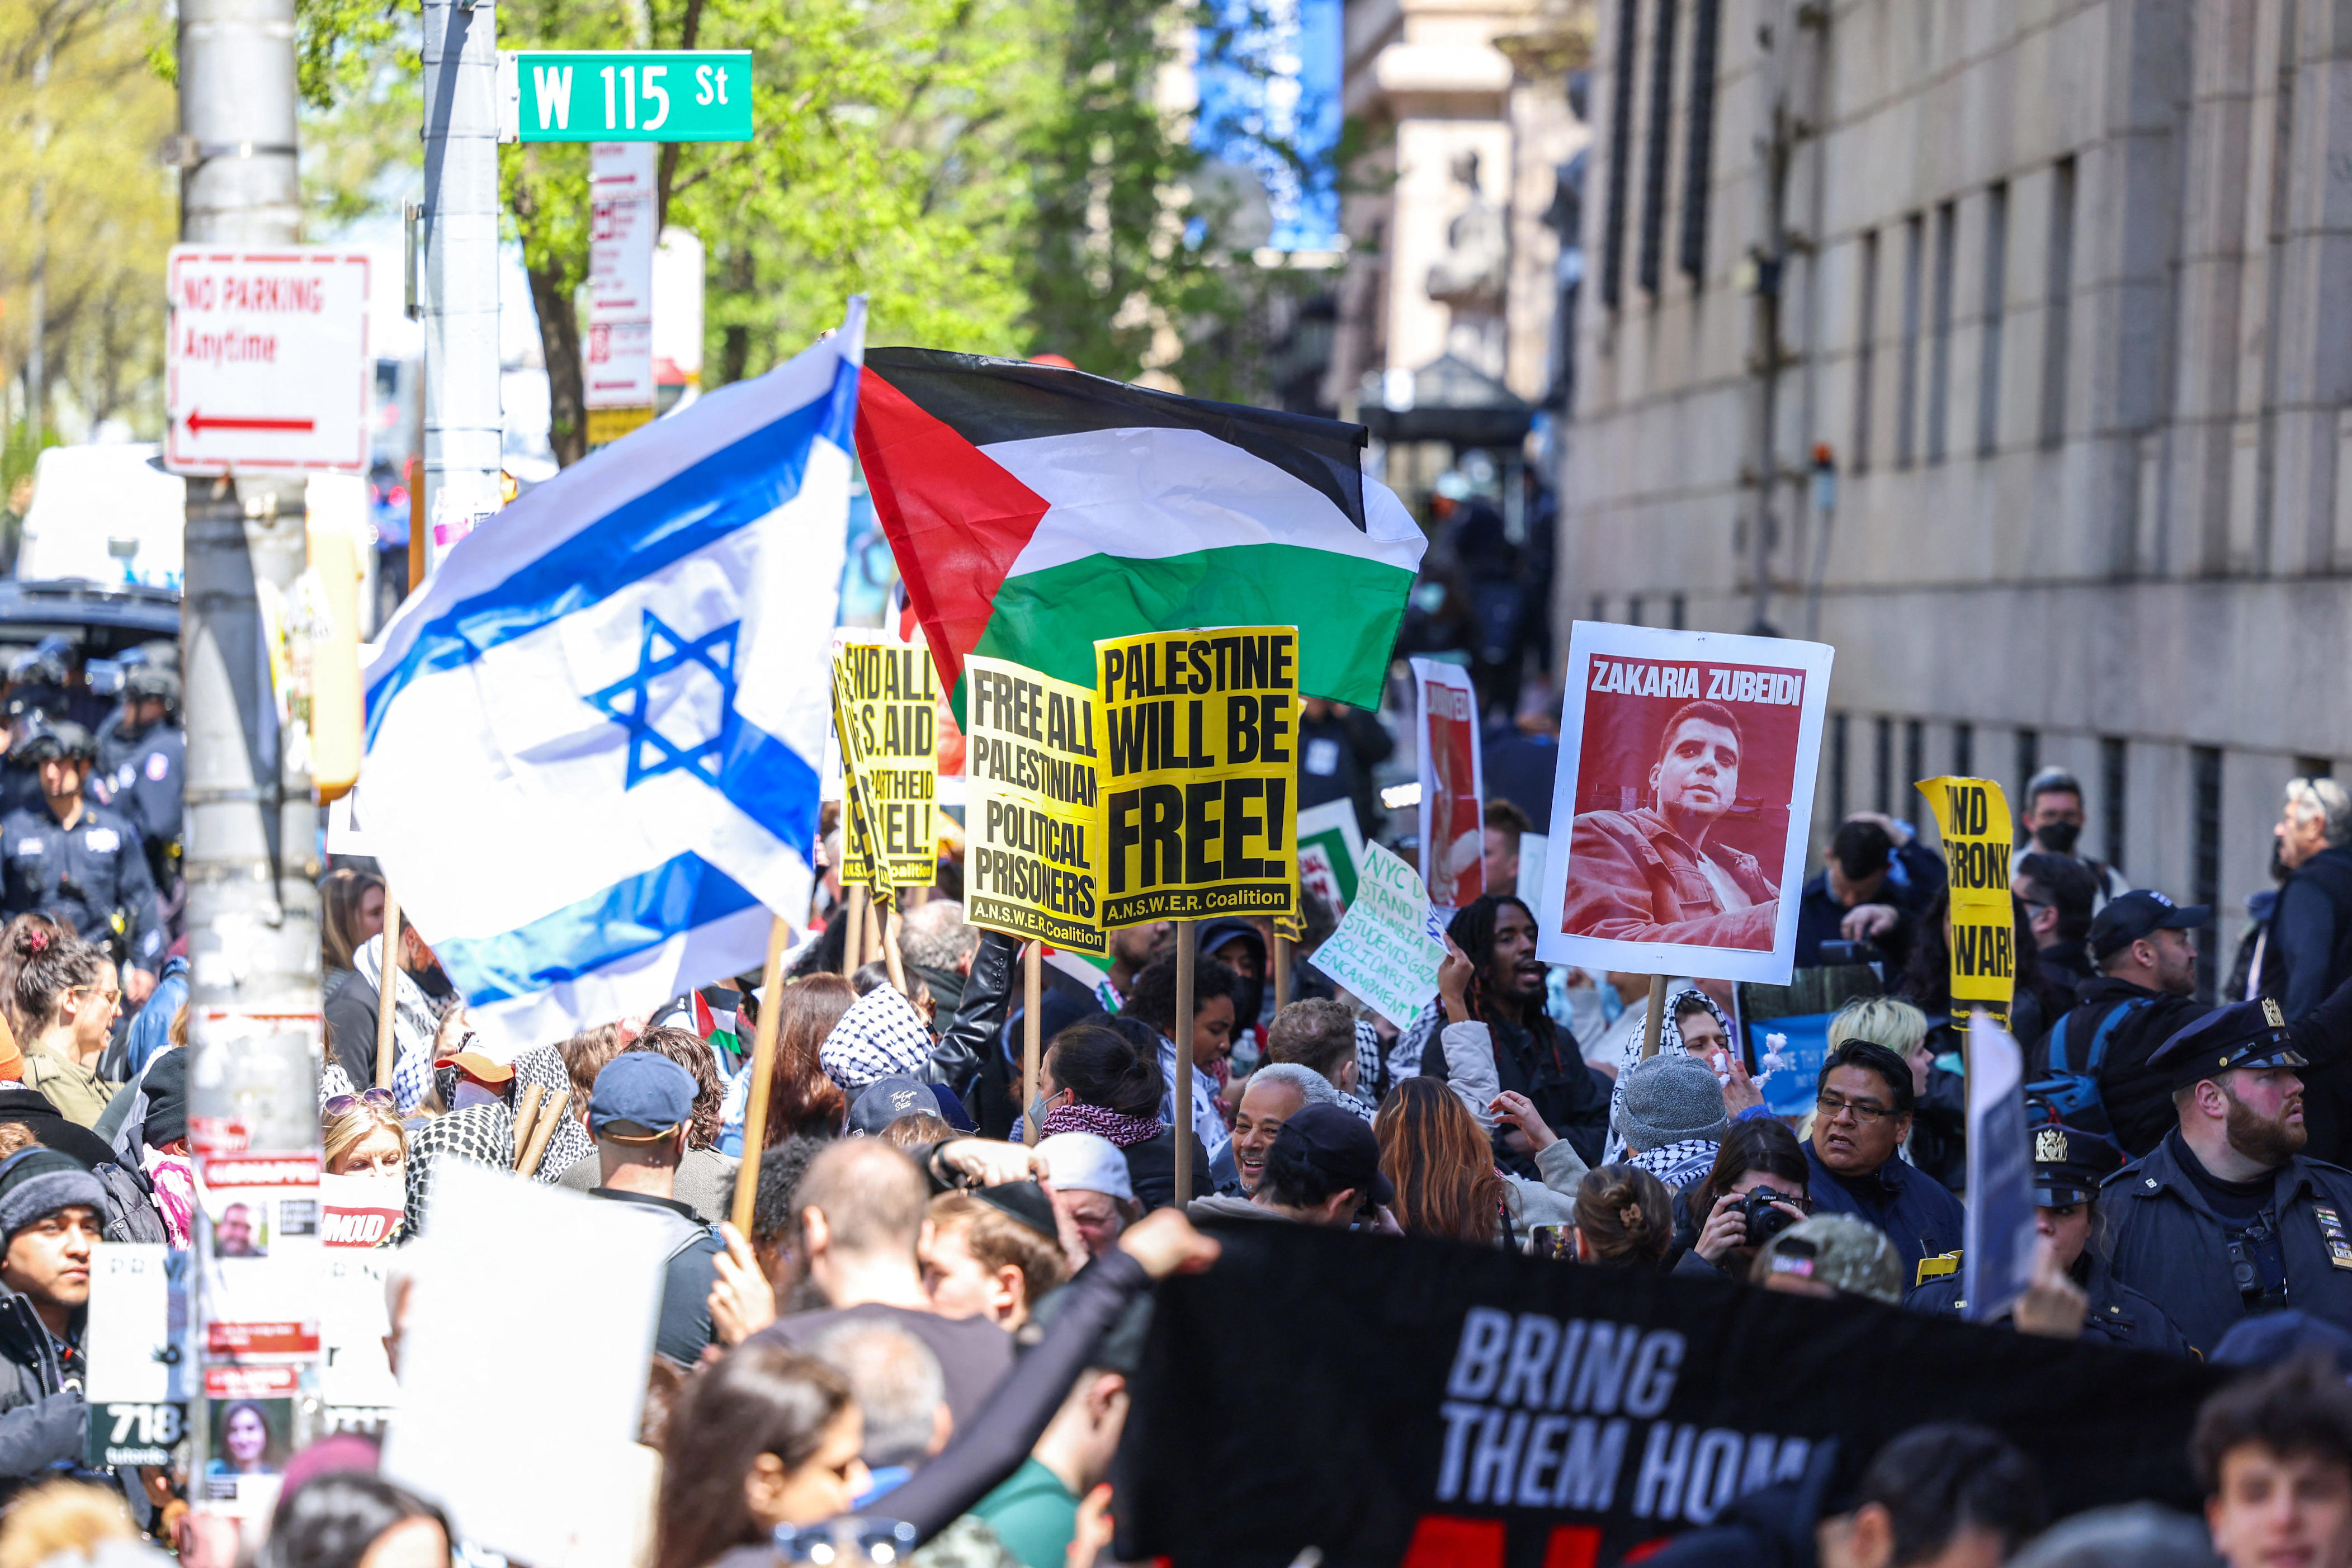 protests in new york as us campuses brace for more unrest over gaza war: updates